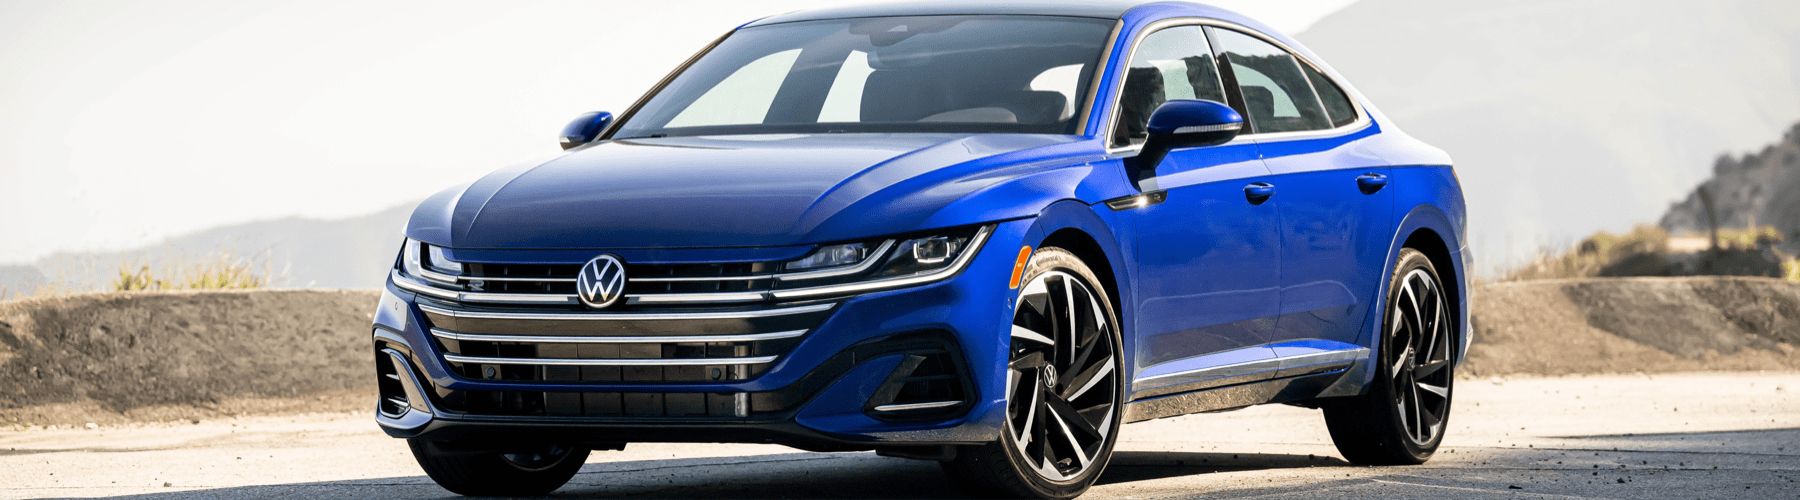 The 2020 volkswagen arteon is driving down a mountain road.